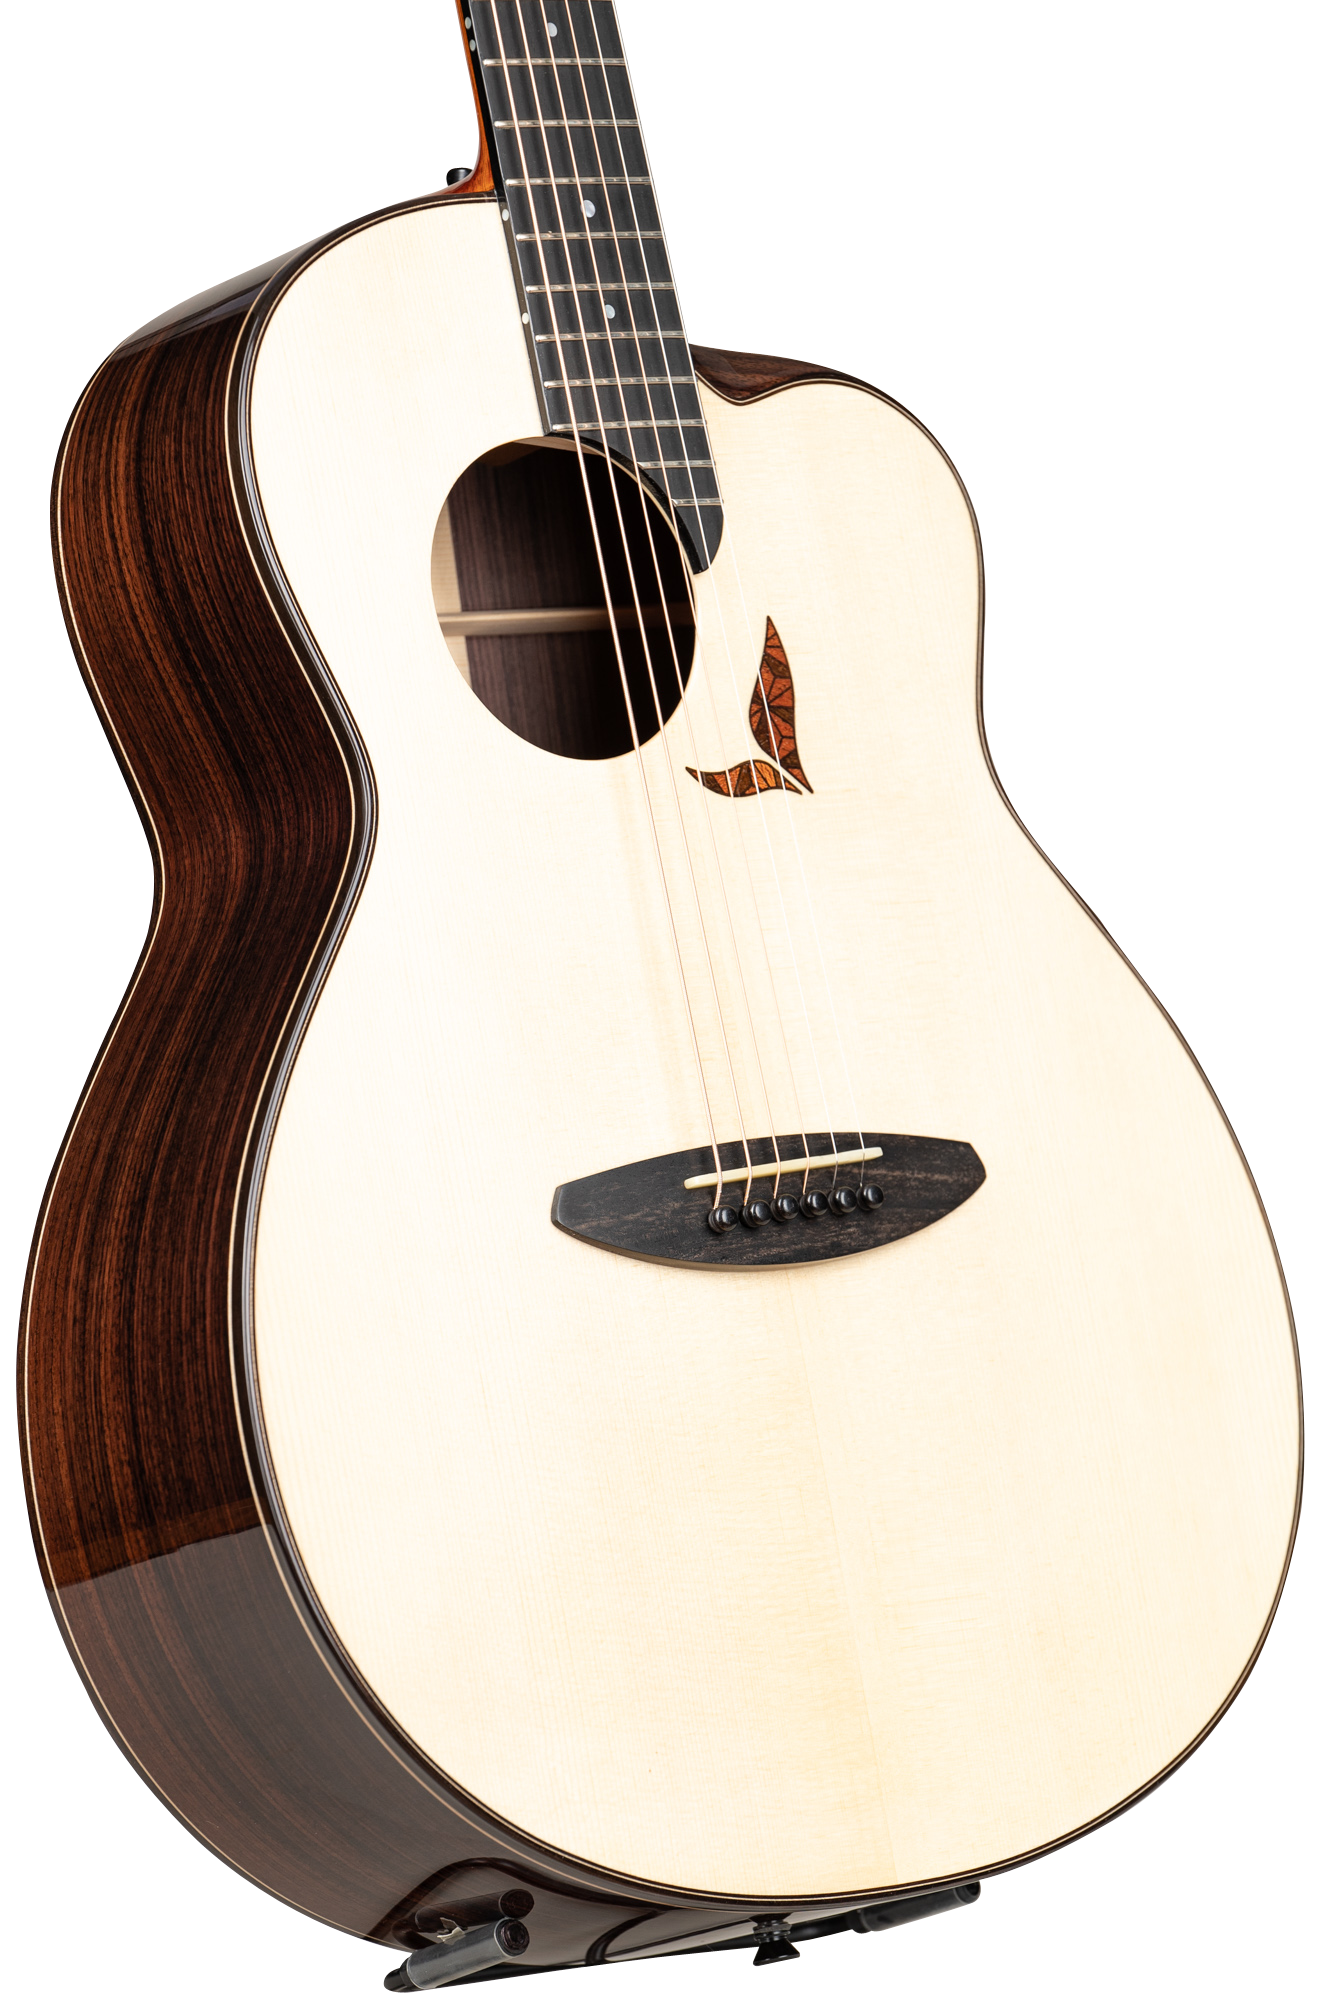 Acoustic Future Series LS700 Moon Spruce / Indian Rosewood Full Size Guitar (with Yosegi Zaiku Marquetry)